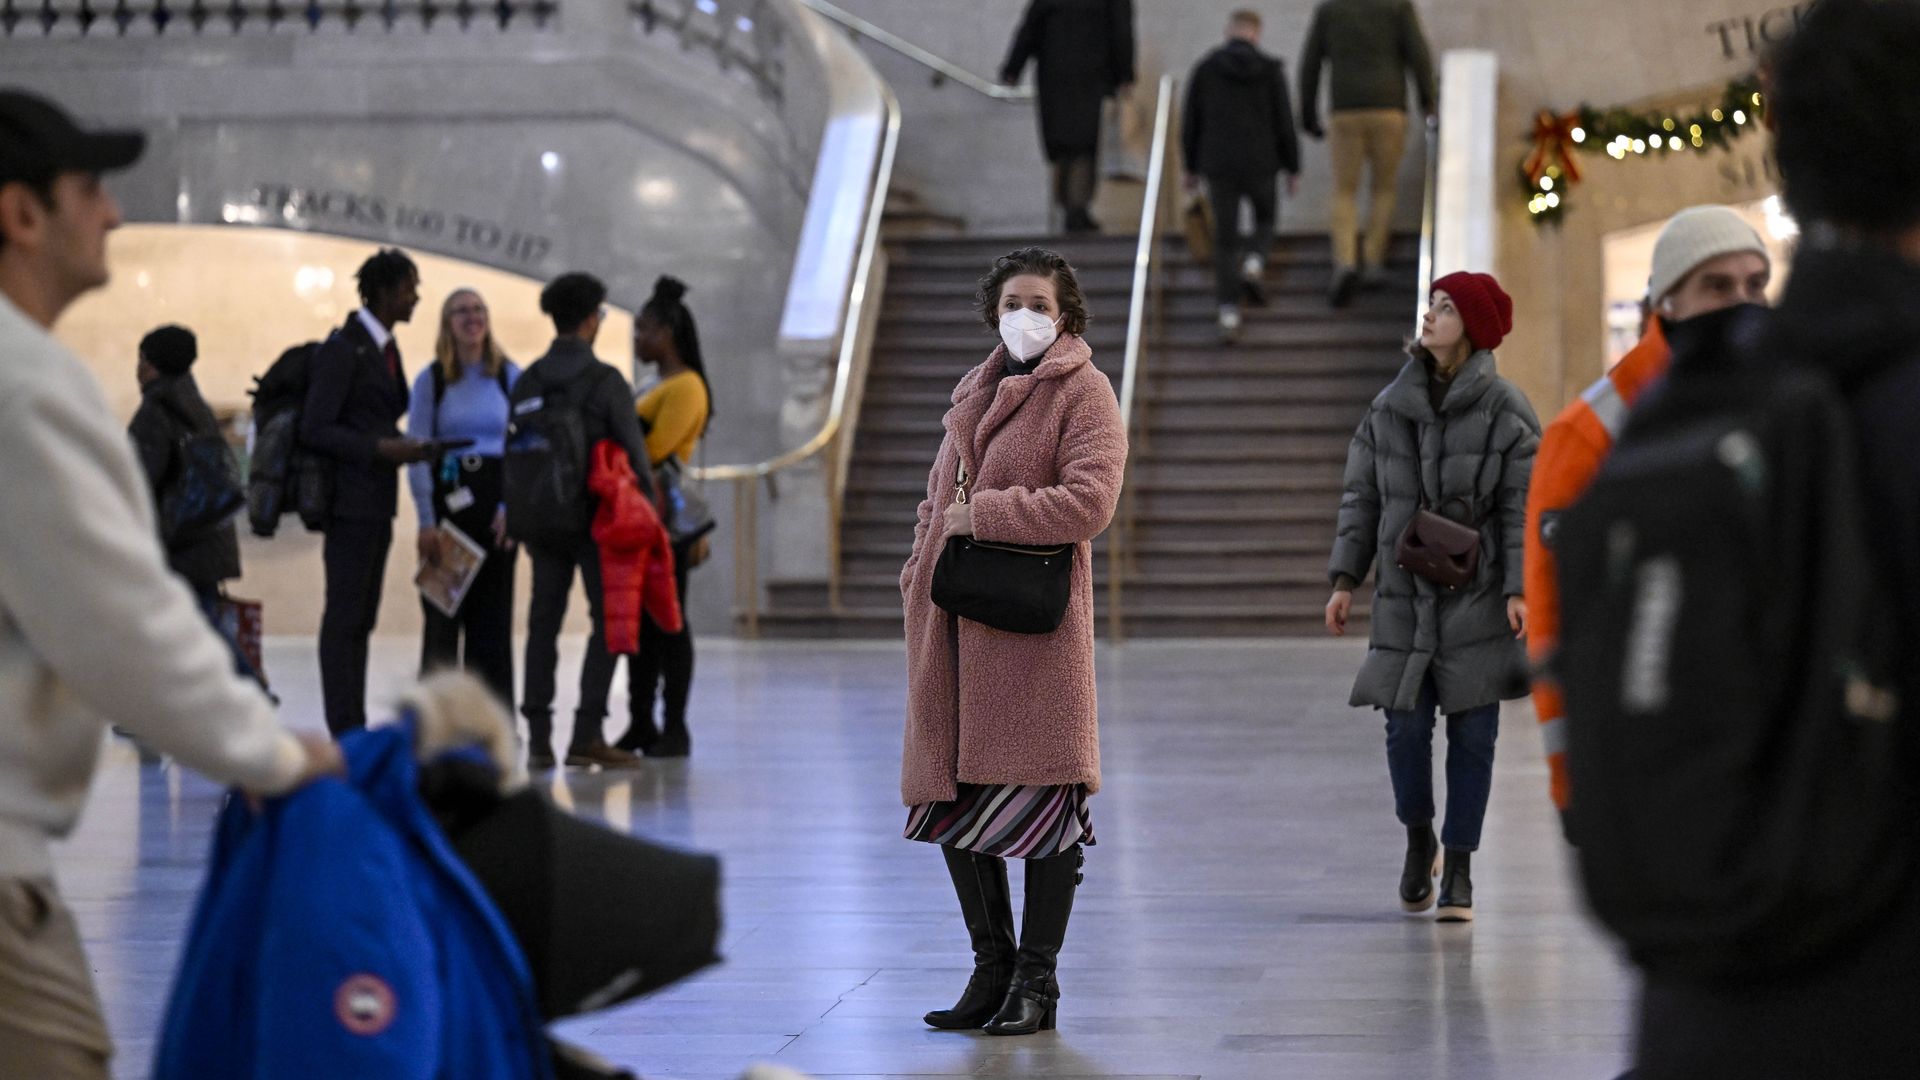 People wear mask after New York City's health officials have issued an advisory, strongly urging New Yorkers to use masks as COVID-19, flu, and RSV cases rise, on December 12, 2022 in New York